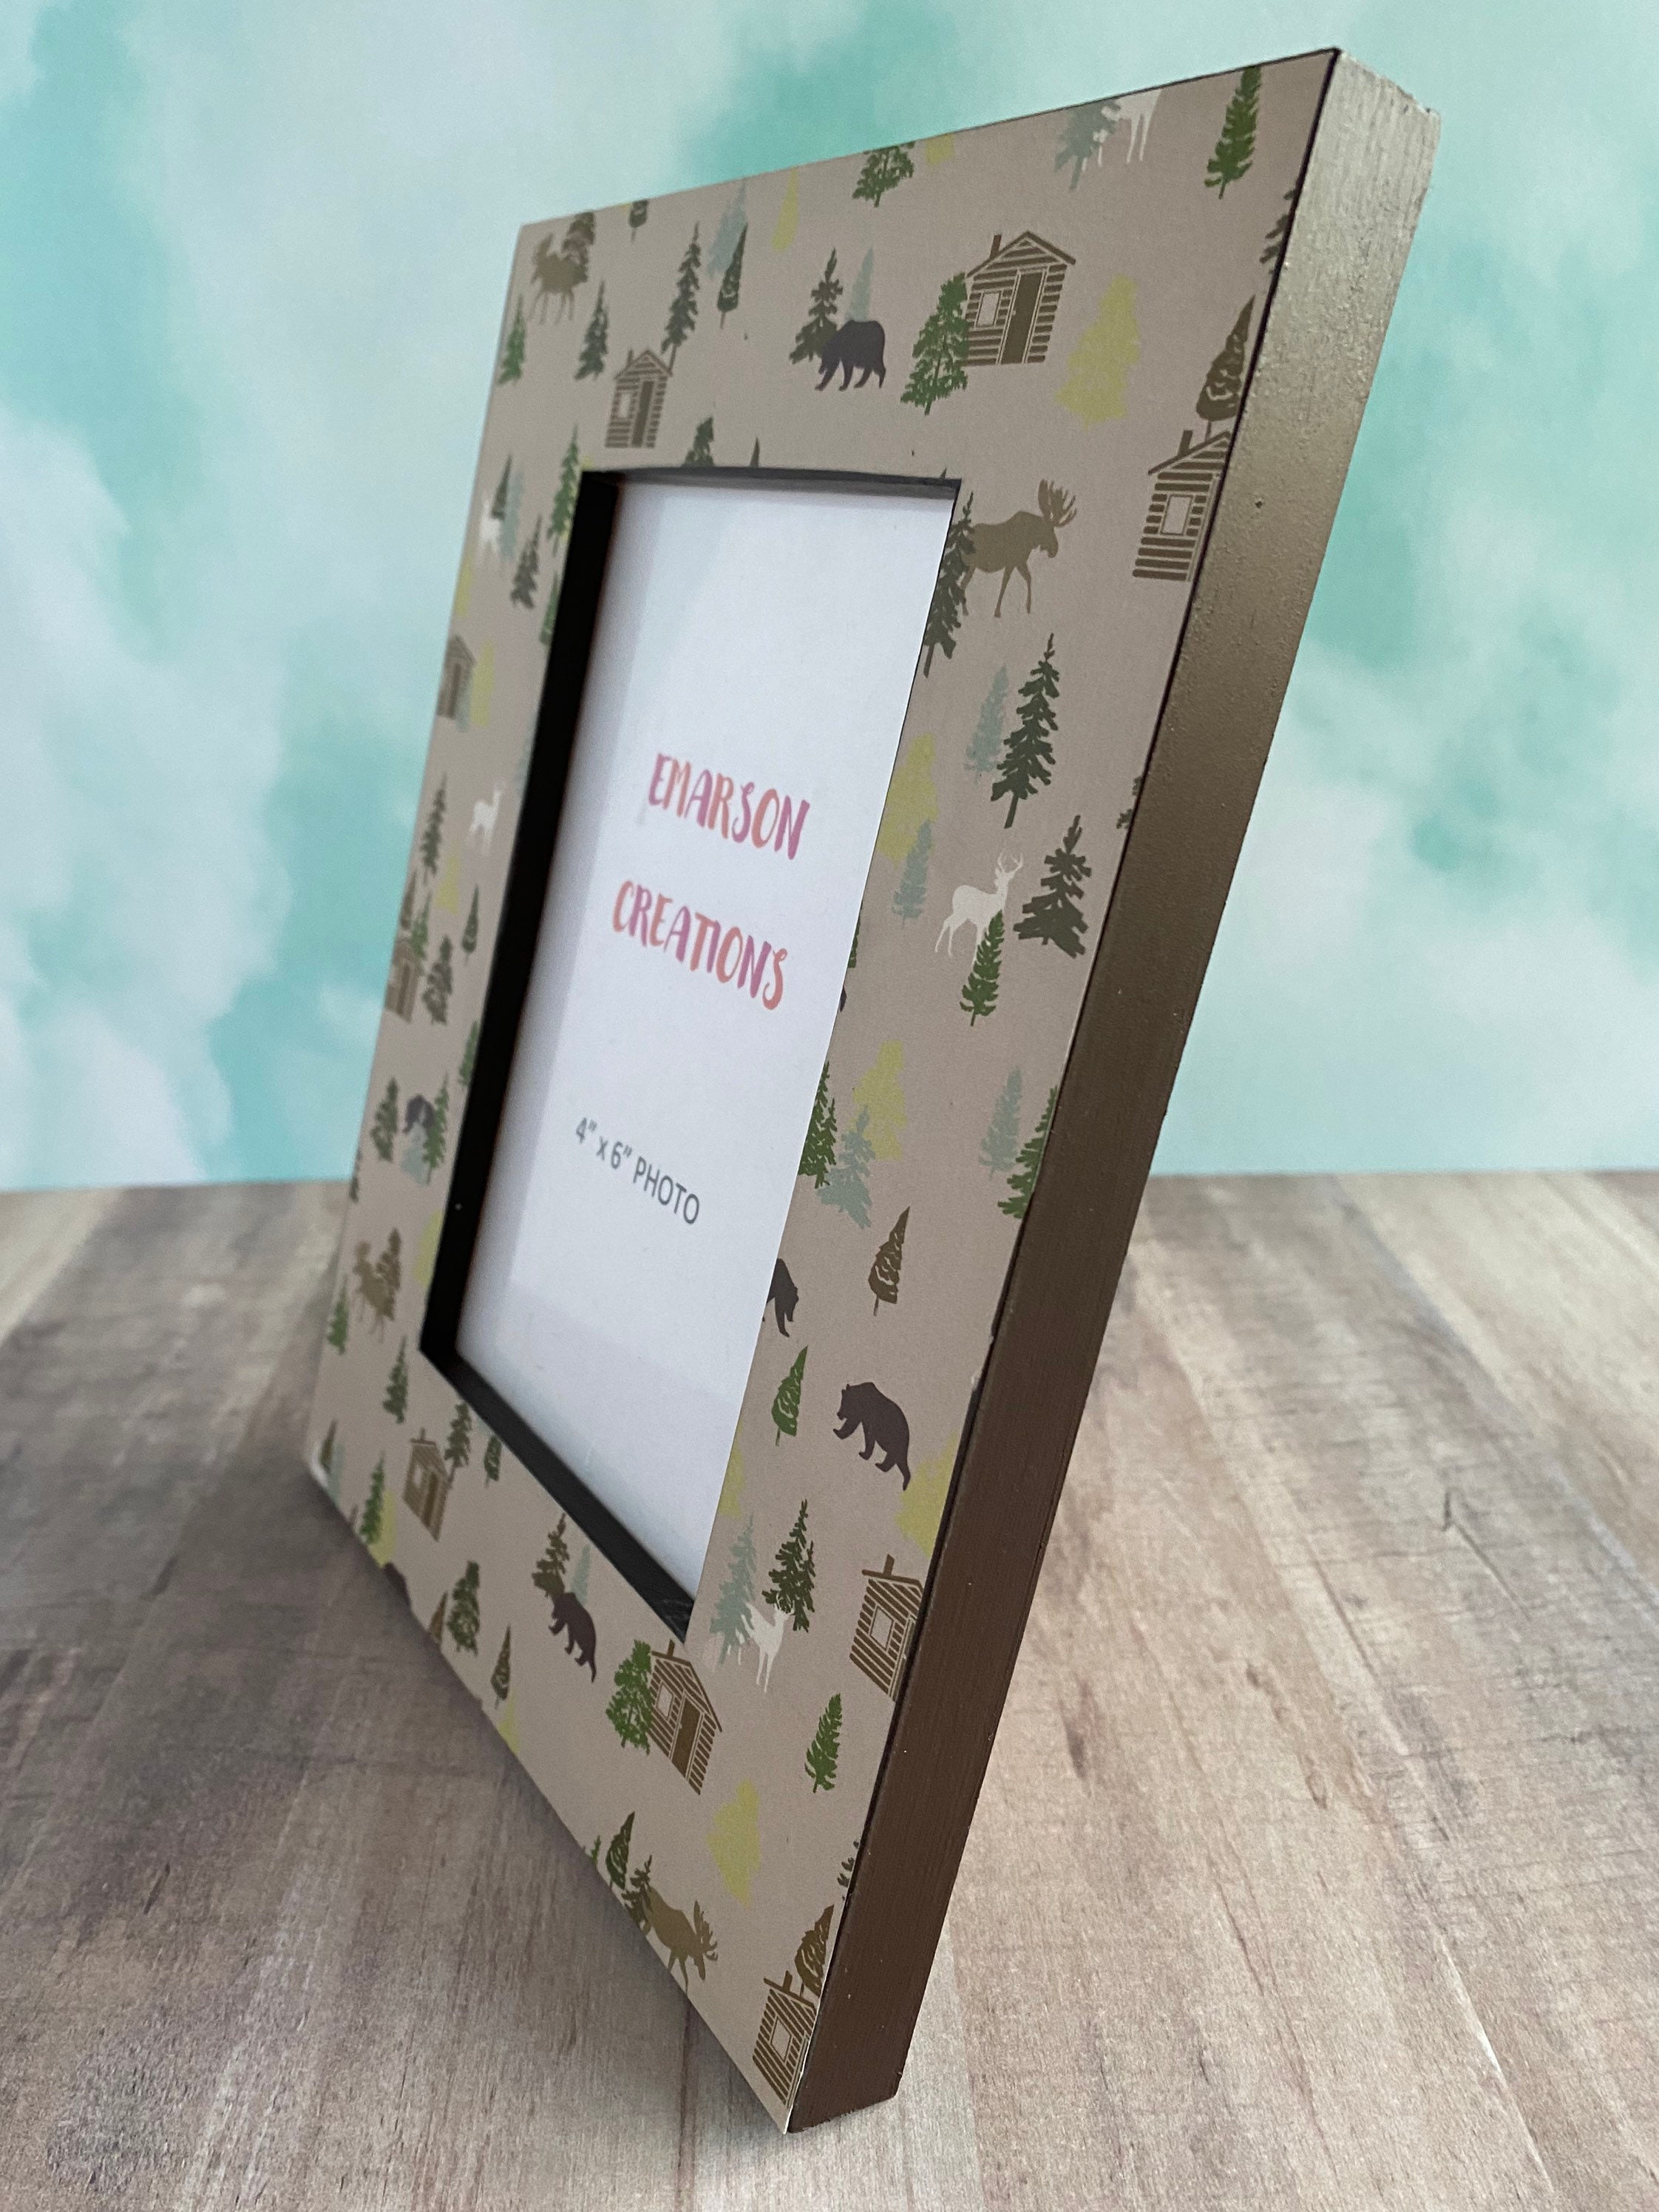 Gift Rustic Decor Deer 4x6 Picture Frame Lodge Woods Cabin Mountains Nature Meta 